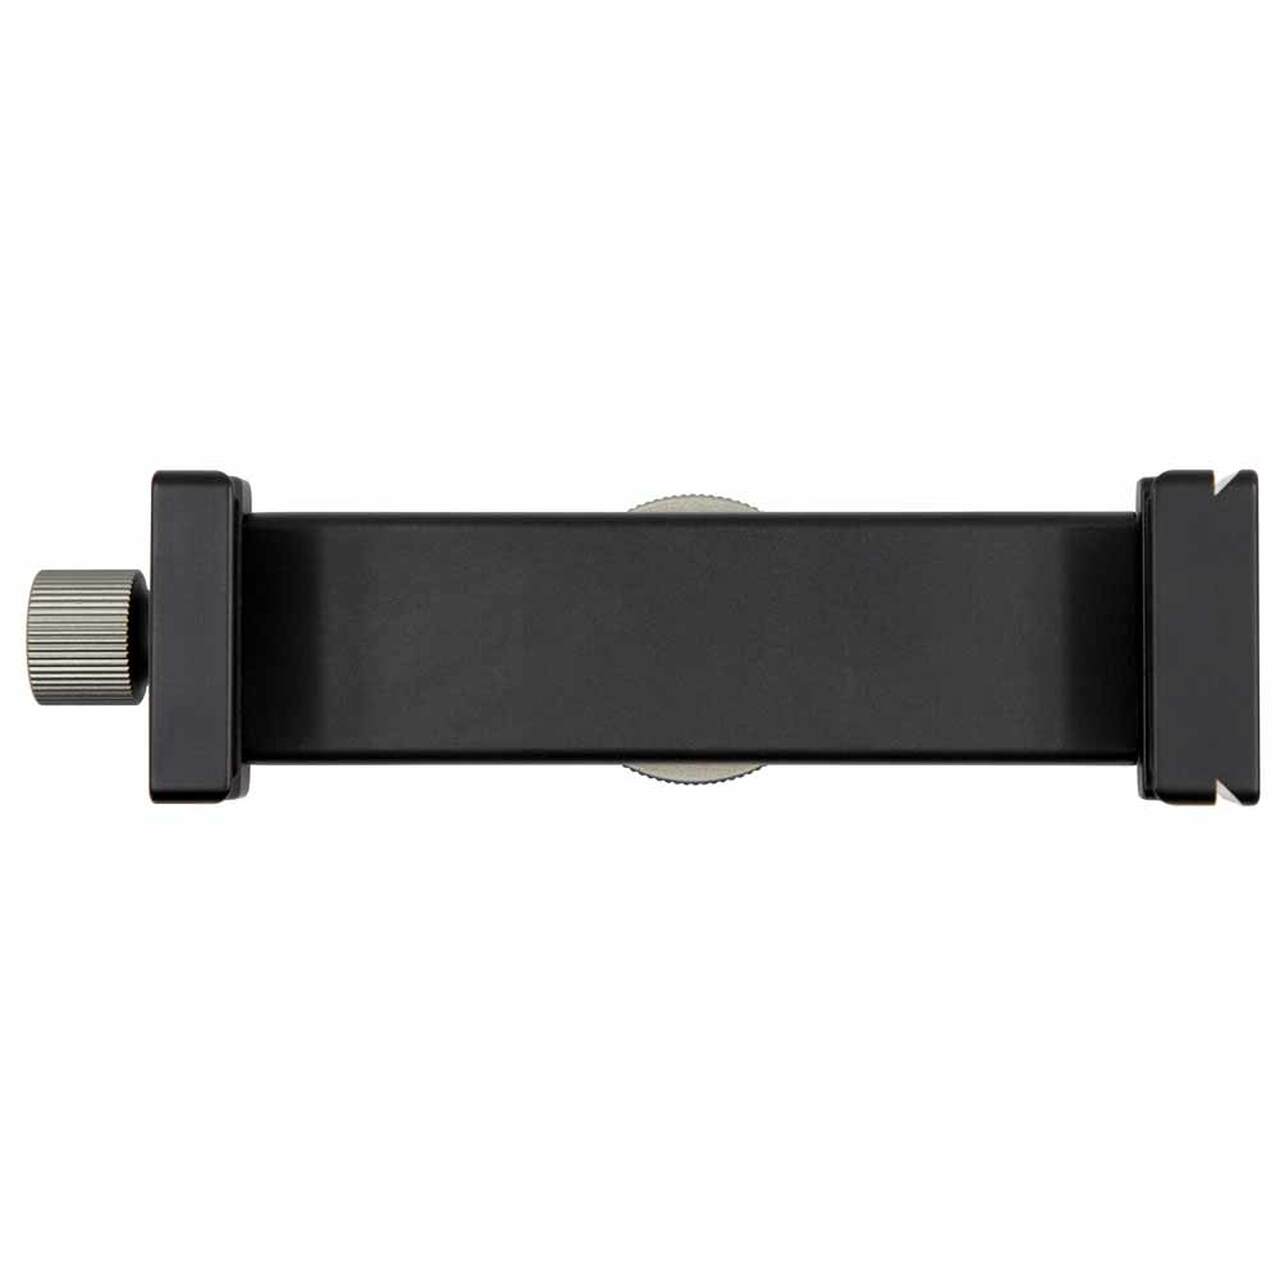 Promaster 6842 Tablet Clamp